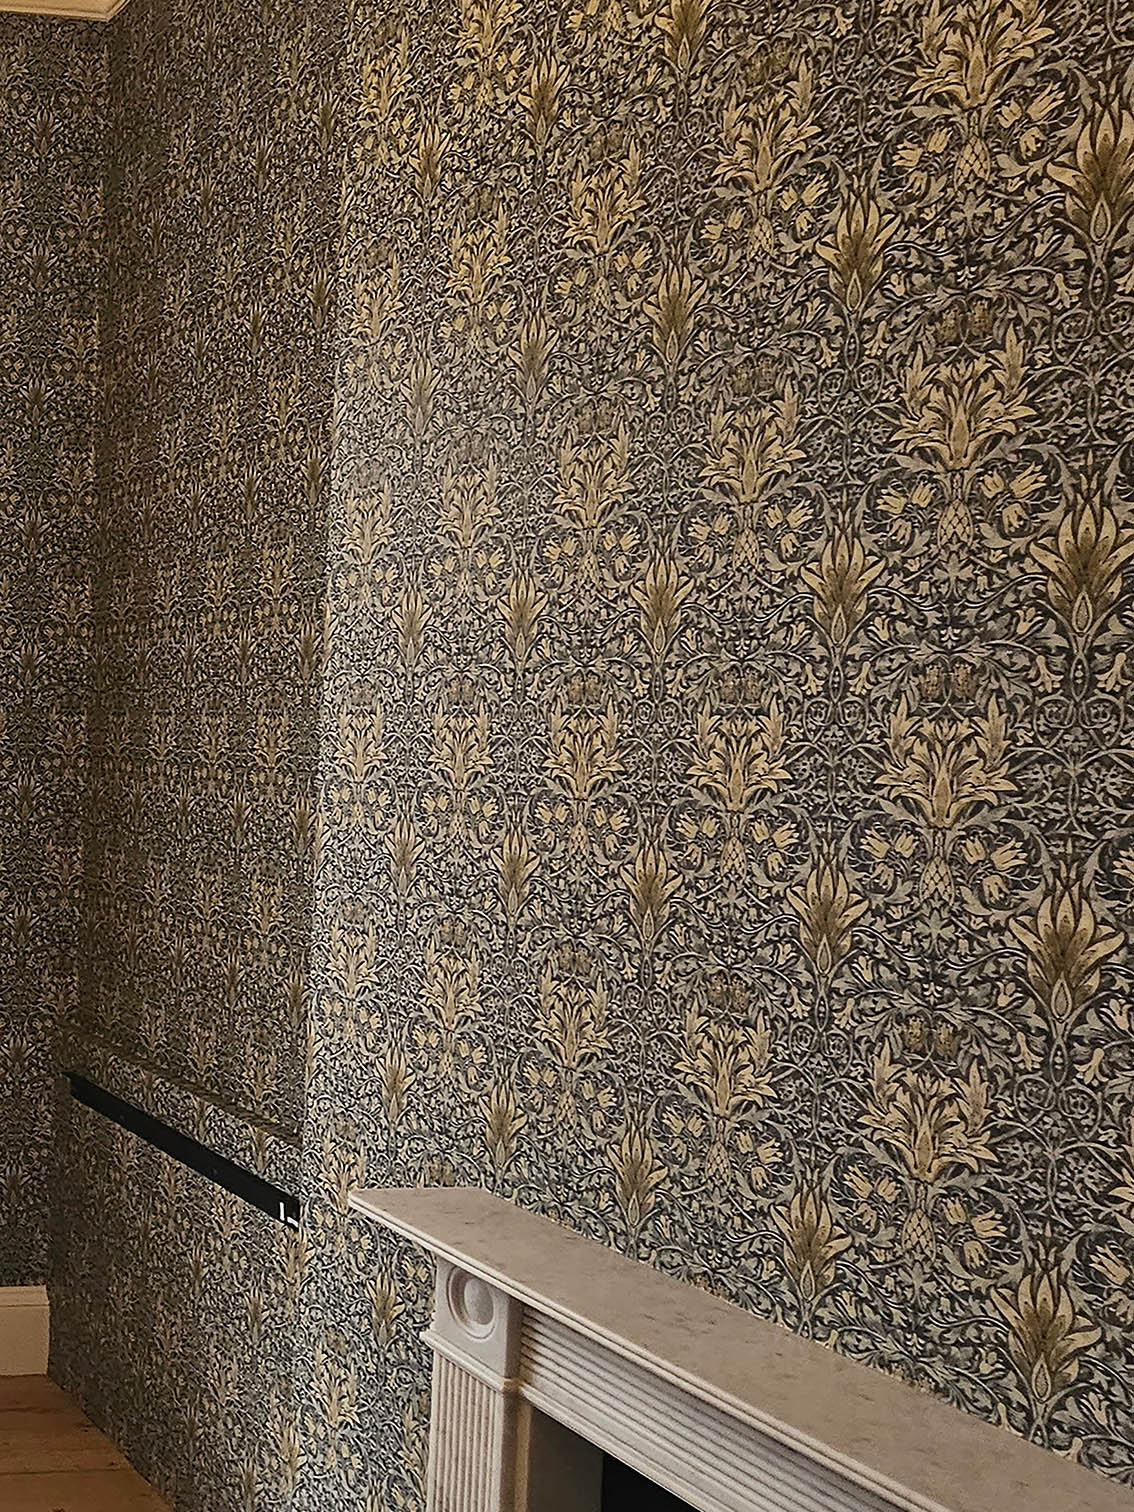 Vintage design wallpaper installed by our wallpaper installers.